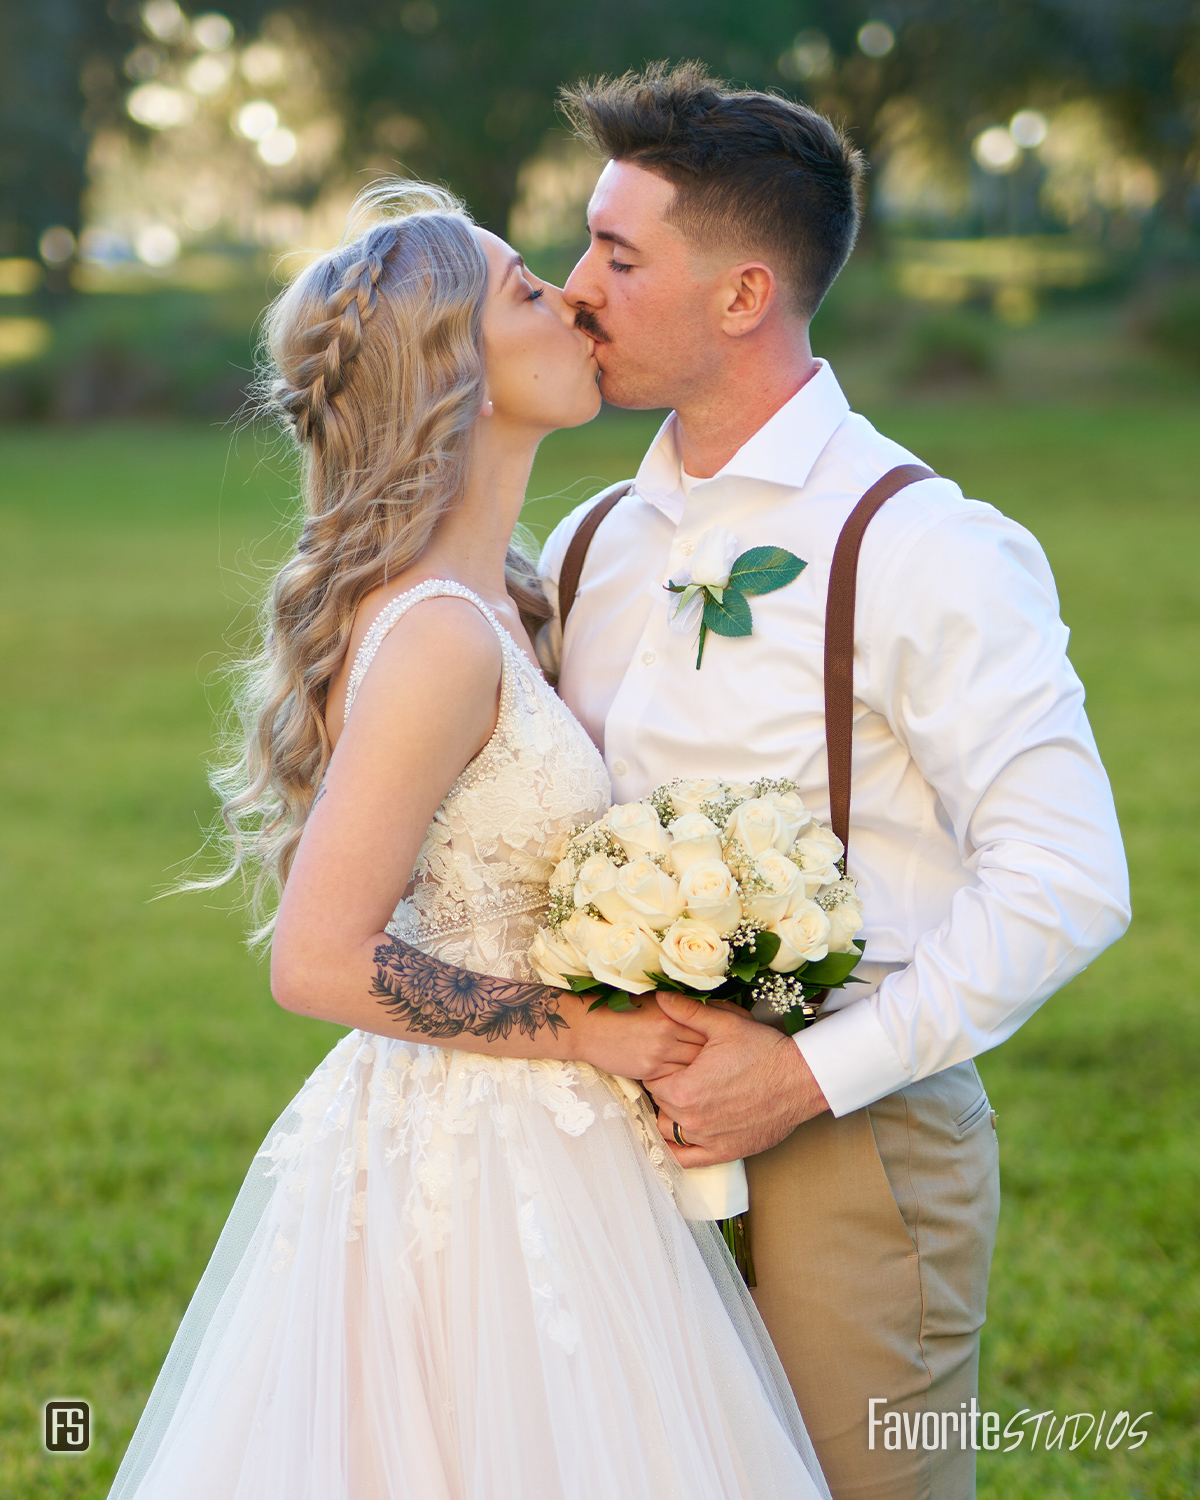 Timeless Bride and Groom Poses